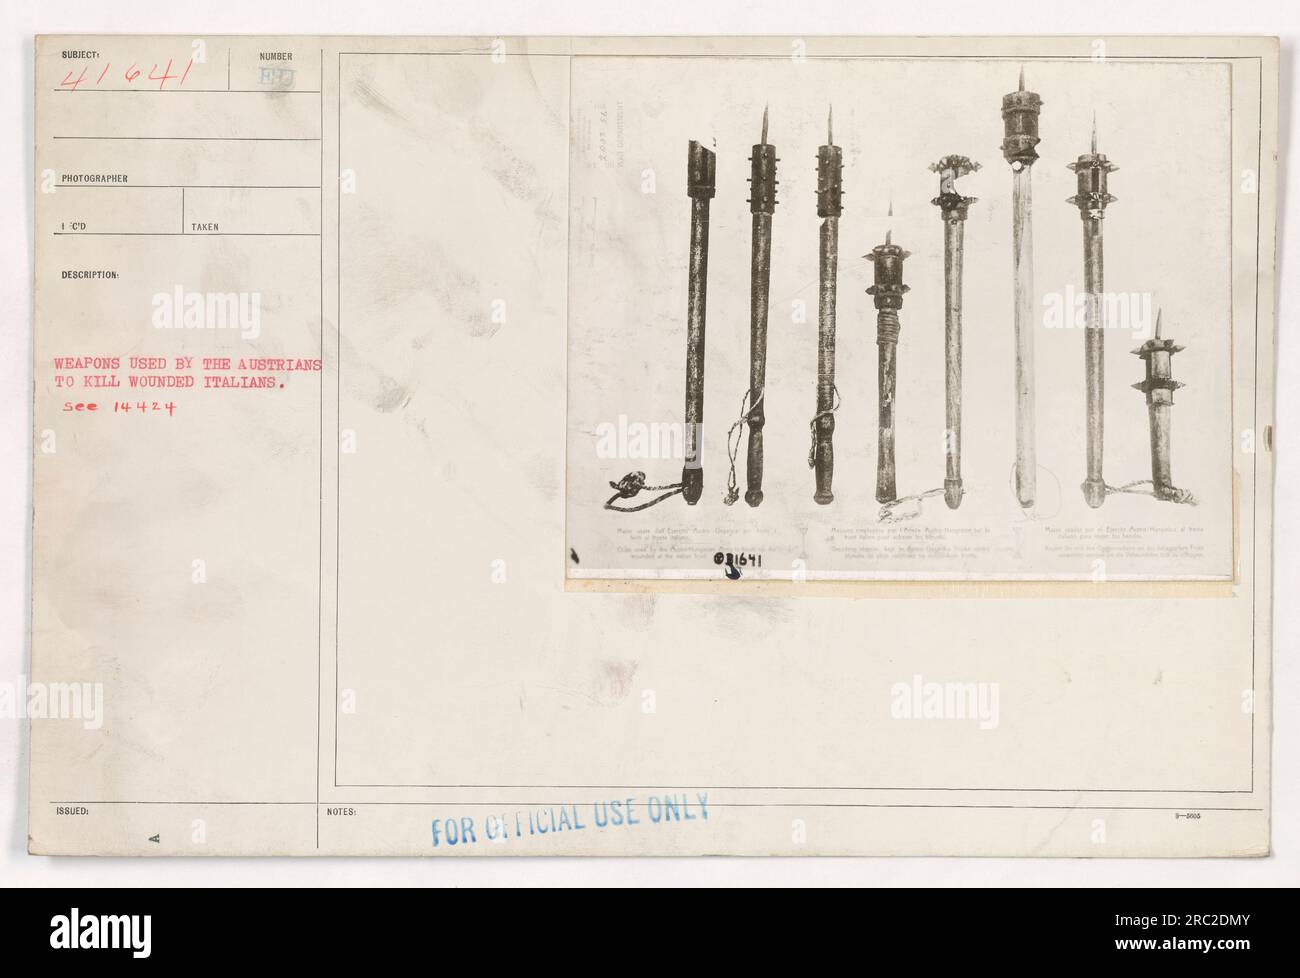 Image: The photograph shows a collection of weapons used by the Austrians to kill wounded Italians during World War One. The weapons appear to be in various stages of disrepair. This image is considered for official use only, with the identification number 31641 1-4. Stock Photo